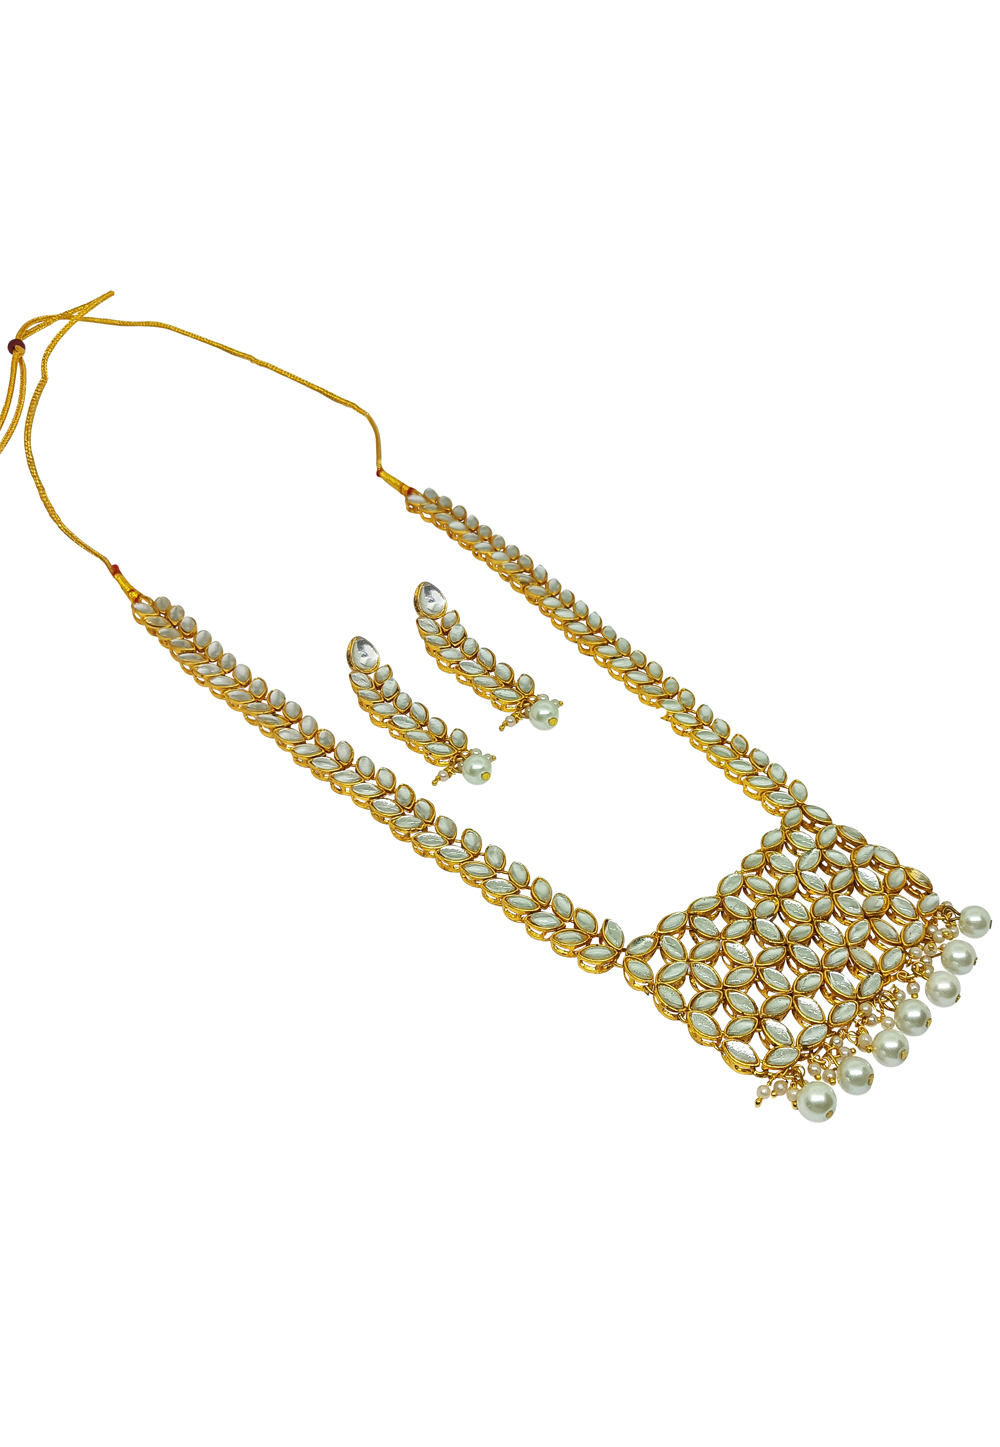 Off White Alloy Austrian Diamonds And Kundan Necklace Set With Earrings 269278